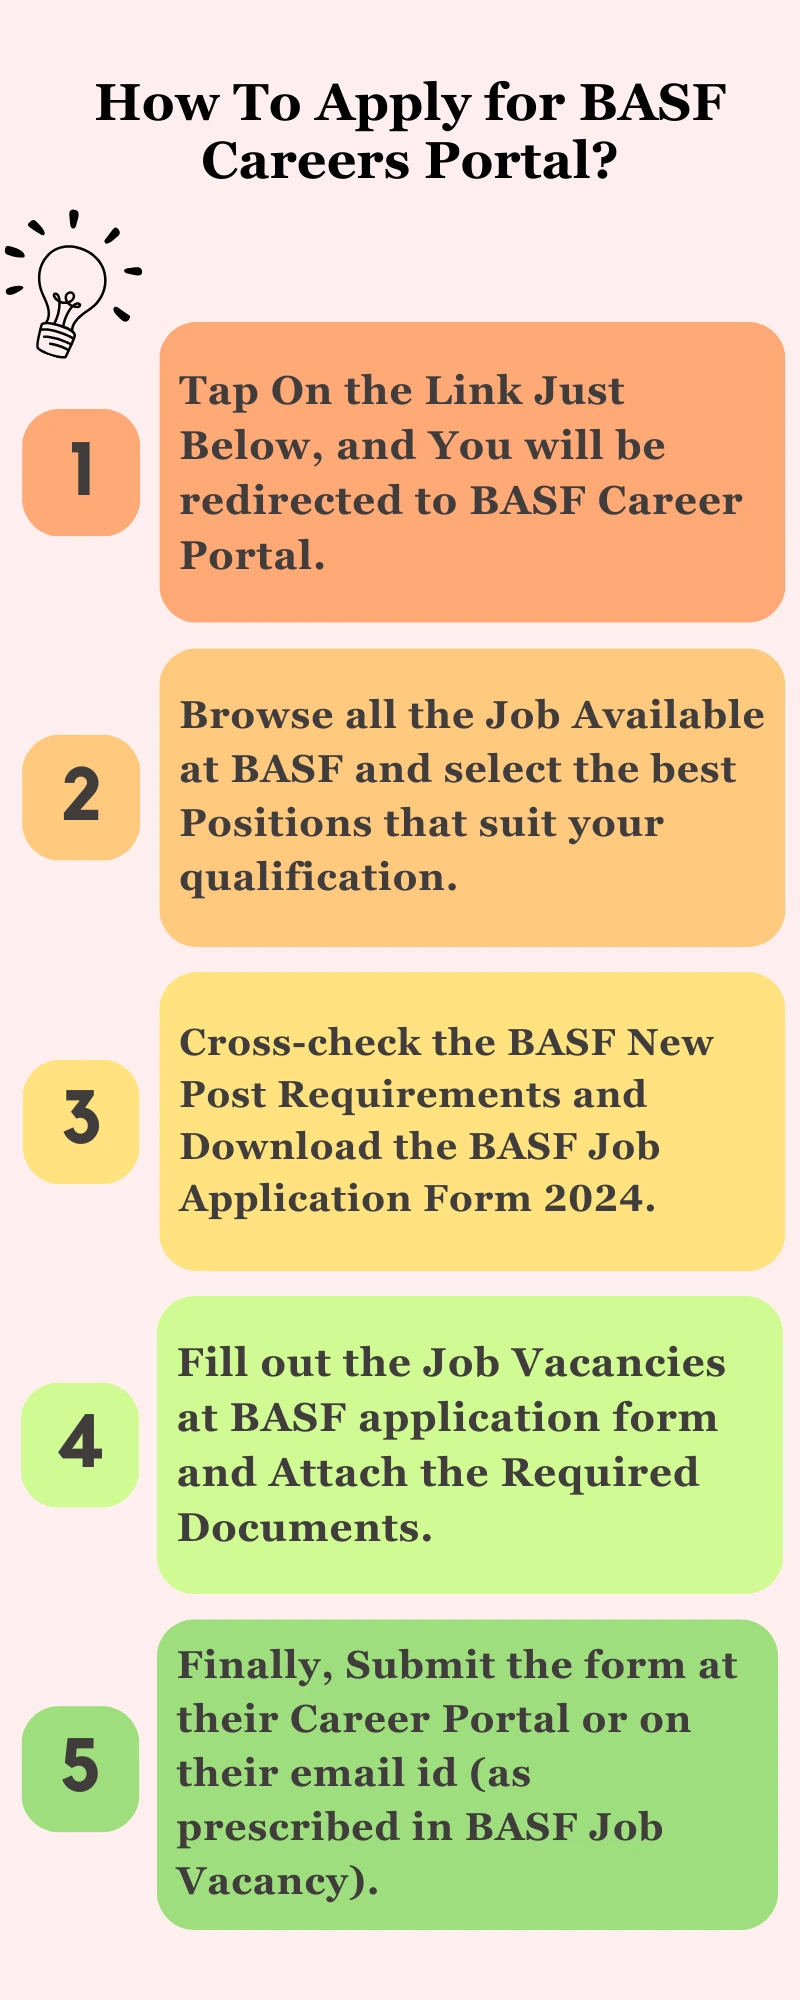 How To Apply for BASF Careers Portal?